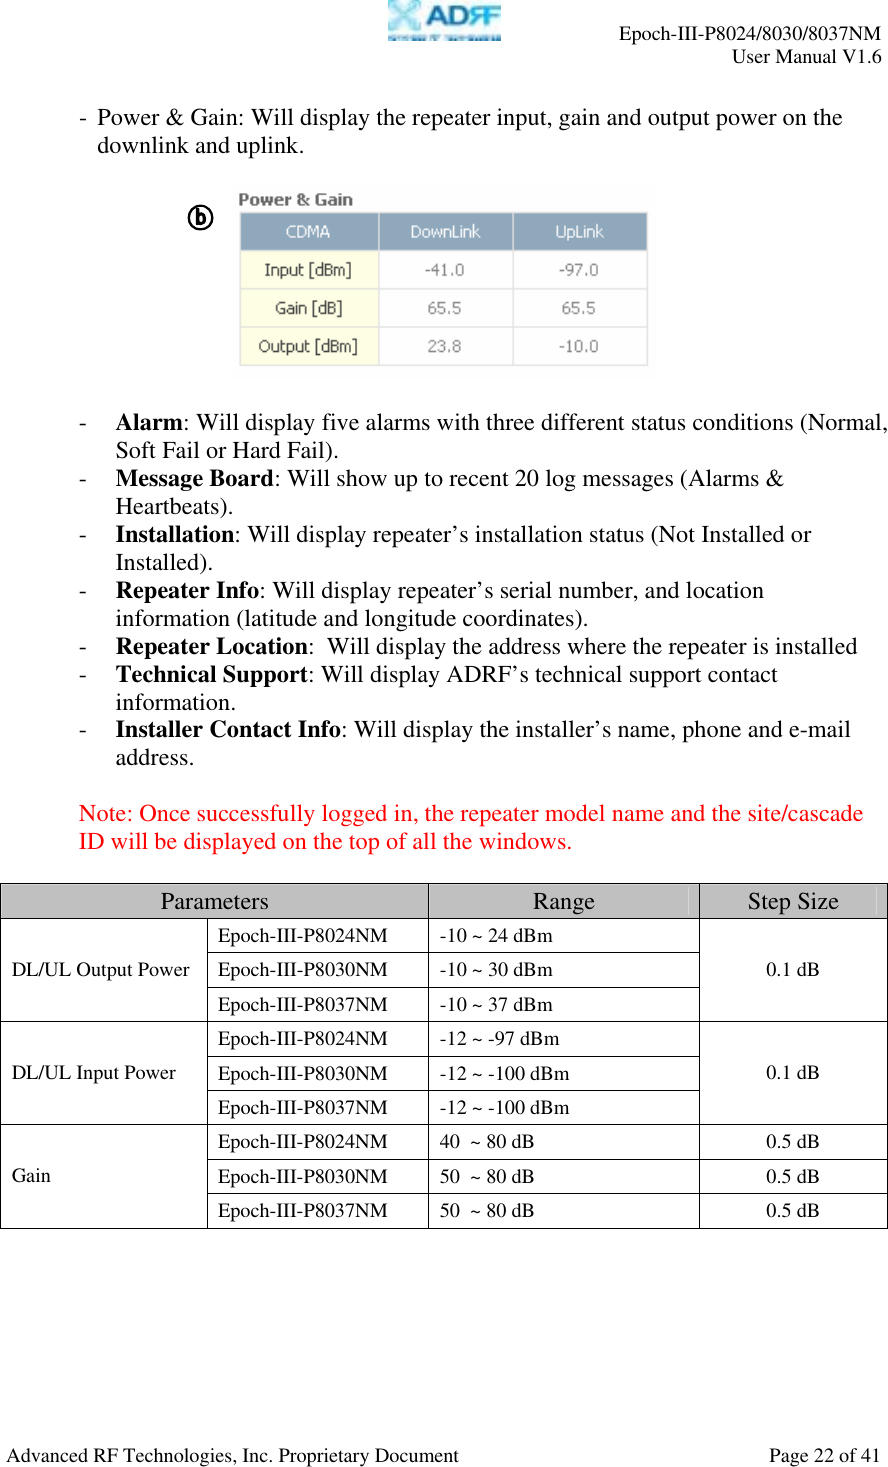     Epoch-III-P8024/8030/8037NM  User Manual V1.6  Advanced RF Technologies, Inc. Proprietary Document  Page 22 of 41  - Power &amp; Gain: Will display the repeater input, gain and output power on the downlink and uplink.    - Alarm: Will display five alarms with three different status conditions (Normal, Soft Fail or Hard Fail). - Message Board: Will show up to recent 20 log messages (Alarms &amp; Heartbeats). - Installation: Will display repeater’s installation status (Not Installed or Installed). - Repeater Info: Will display repeater’s serial number, and location information (latitude and longitude coordinates). - Repeater Location:  Will display the address where the repeater is installed - Technical Support: Will display ADRF’s technical support contact information. - Installer Contact Info: Will display the installer’s name, phone and e-mail address.  Note: Once successfully logged in, the repeater model name and the site/cascade ID will be displayed on the top of all the windows.  Parameters  Range  Step Size Epoch-III-P8024NM  -10 ~ 24 dBm Epoch-III-P8030NM  -10 ~ 30 dBm DL/UL Output PowerEpoch-III-P8037NM  -10 ~ 37 dBm 0.1 dB Epoch-III-P8024NM  -12 ~ -97 dBm Epoch-III-P8030NM  -12 ~ -100 dBm DL/UL Input Power Epoch-III-P8037NM  -12 ~ -100 dBm 0.1 dB Epoch-III-P8024NM  40  ~ 80 dB  0.5 dB Epoch-III-P8030NM  50  ~ 80 dB  0.5 dB Gain Epoch-III-P8037NM  50  ~ 80 dB  0.5 dB  